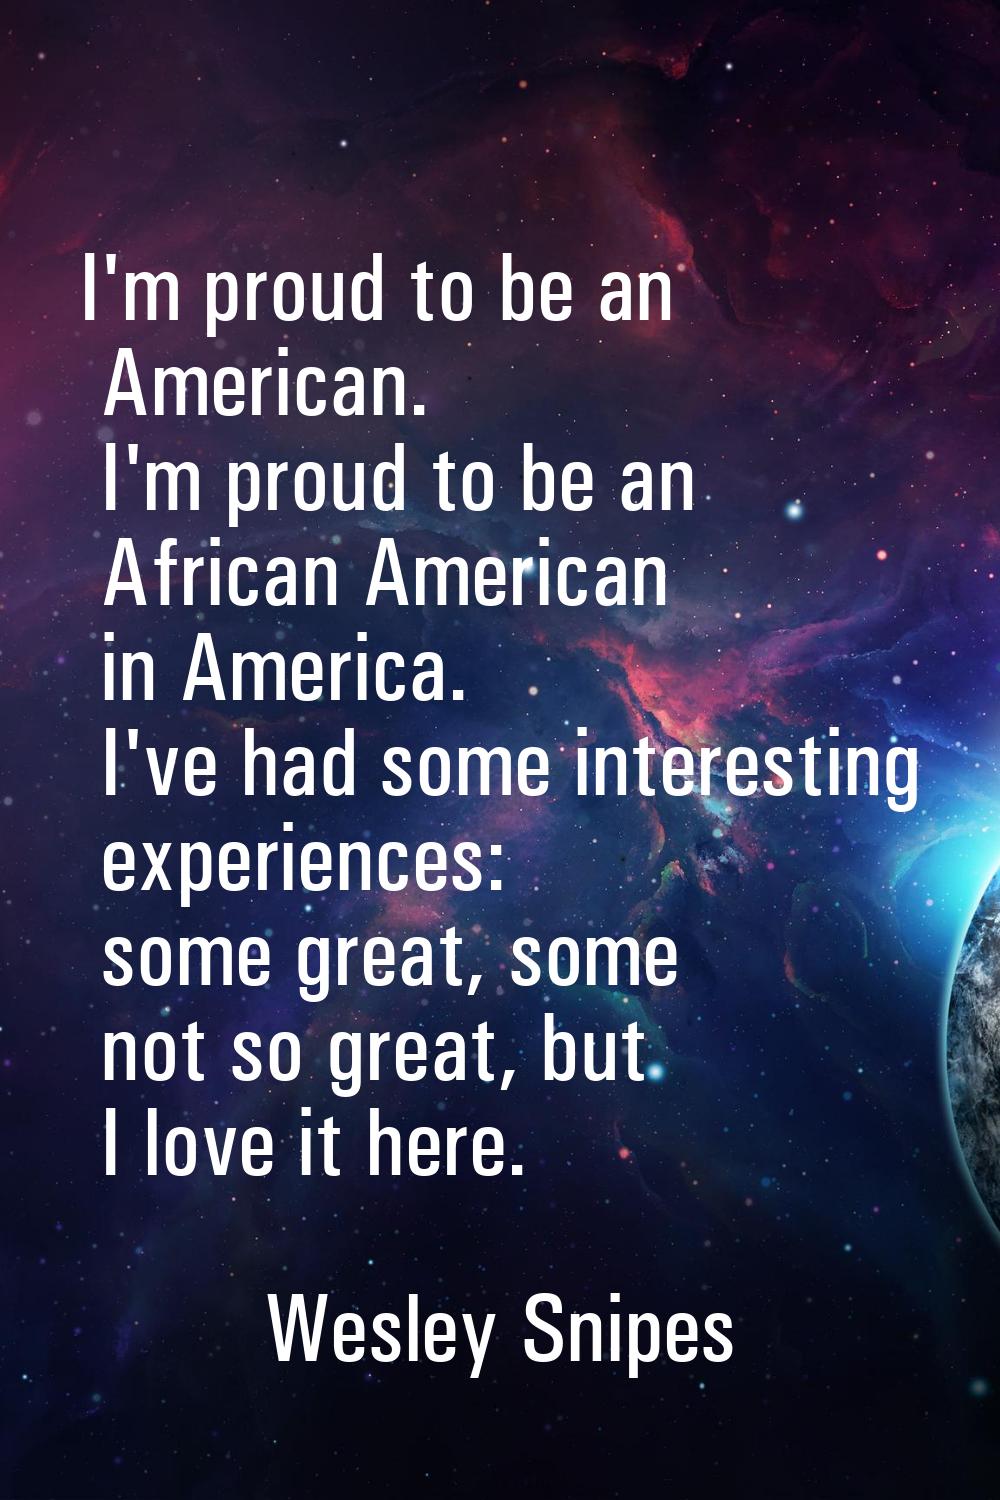 I'm proud to be an American. I'm proud to be an African American in America. I've had some interest